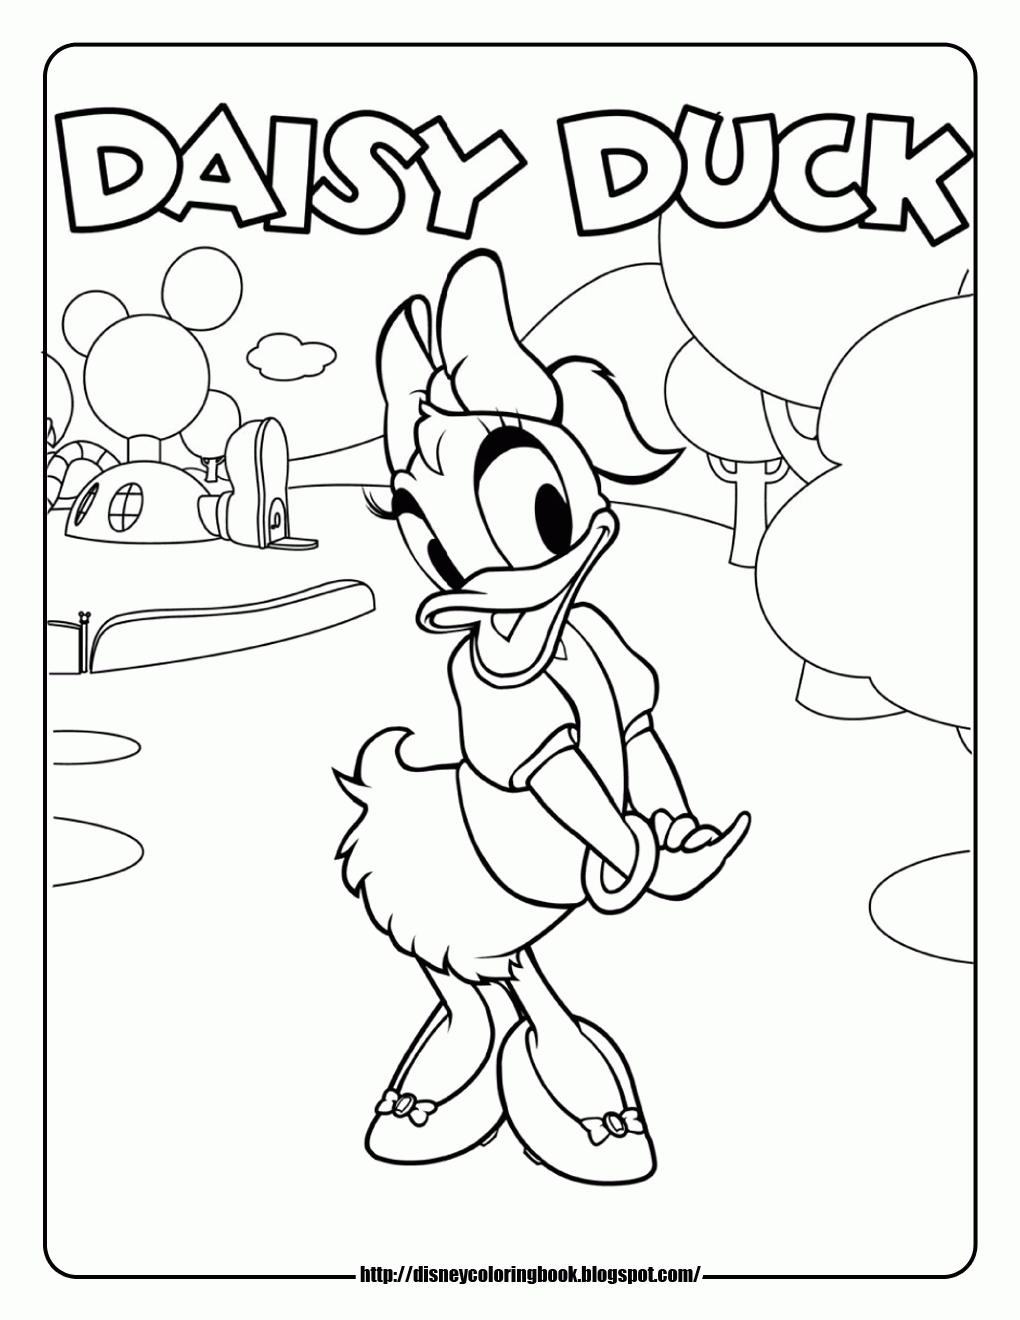 Free Coloring Page Of Mickey Mouse Clubhouse, Download Free Coloring